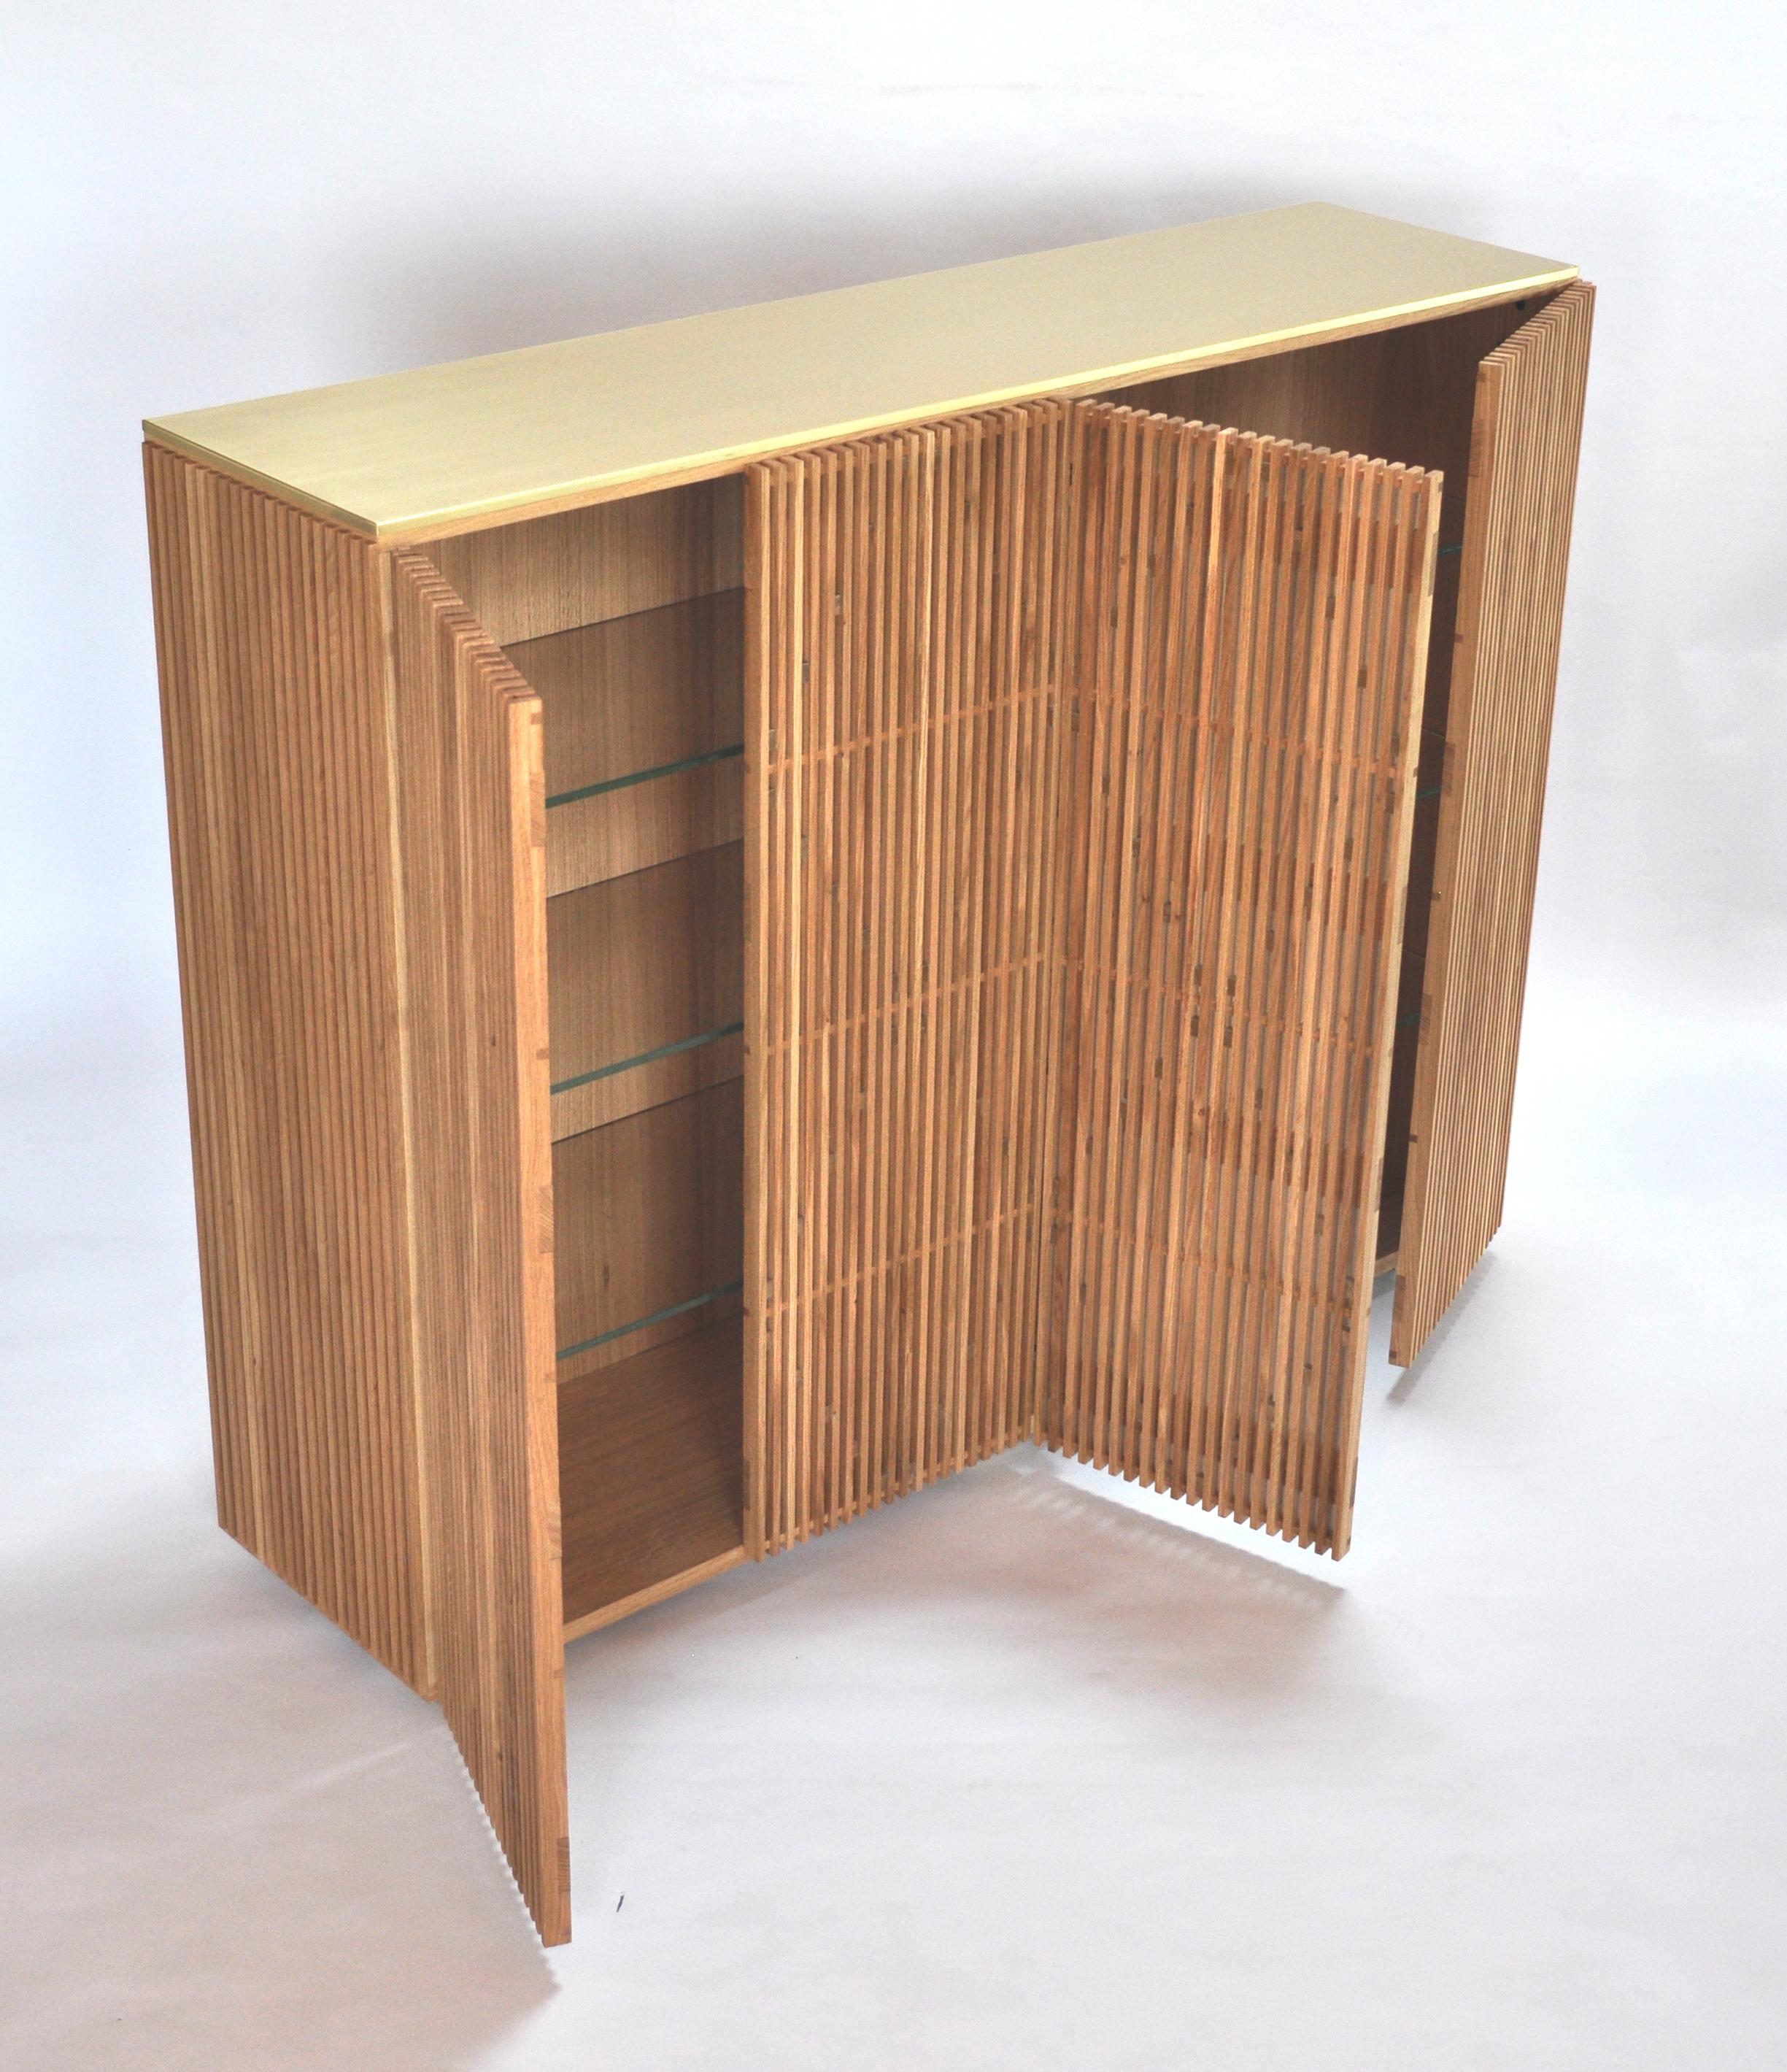 Contemporary Cabinet Milione by Debonademeo for Medulum, Oakwood and Brass, Covered in Brass For Sale